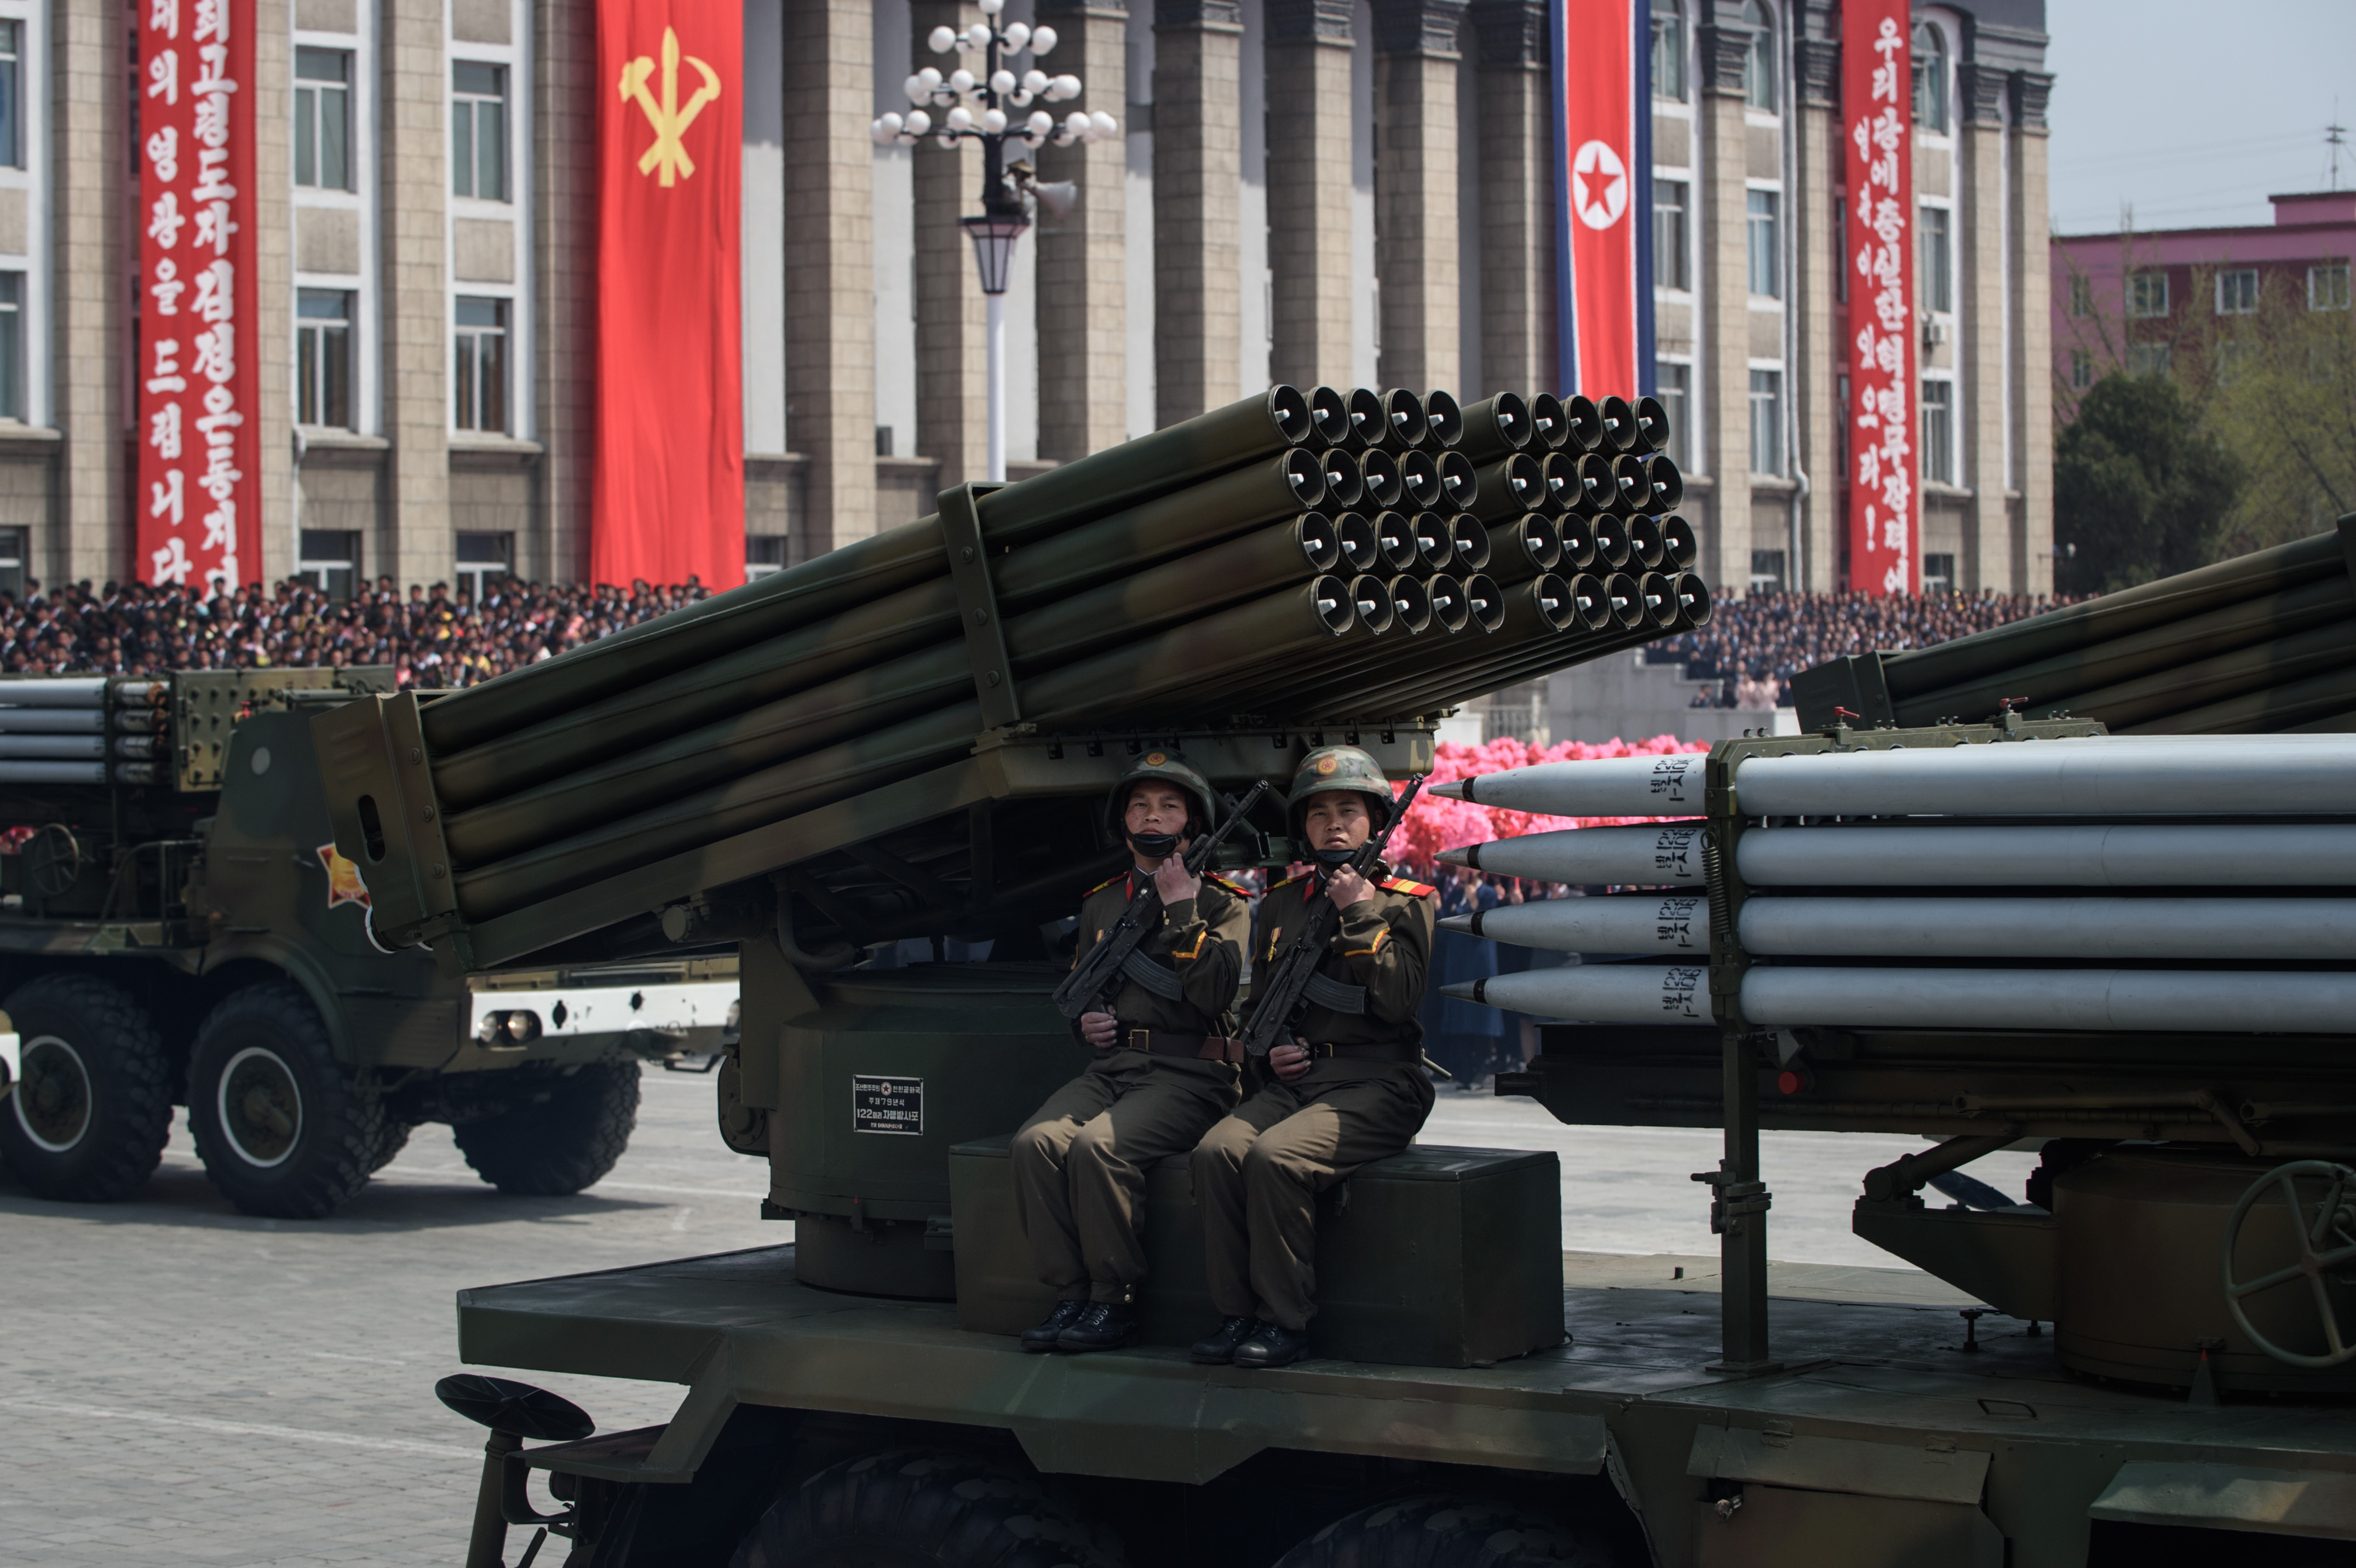 North Korea says tests rocket launchers after firing projectiles